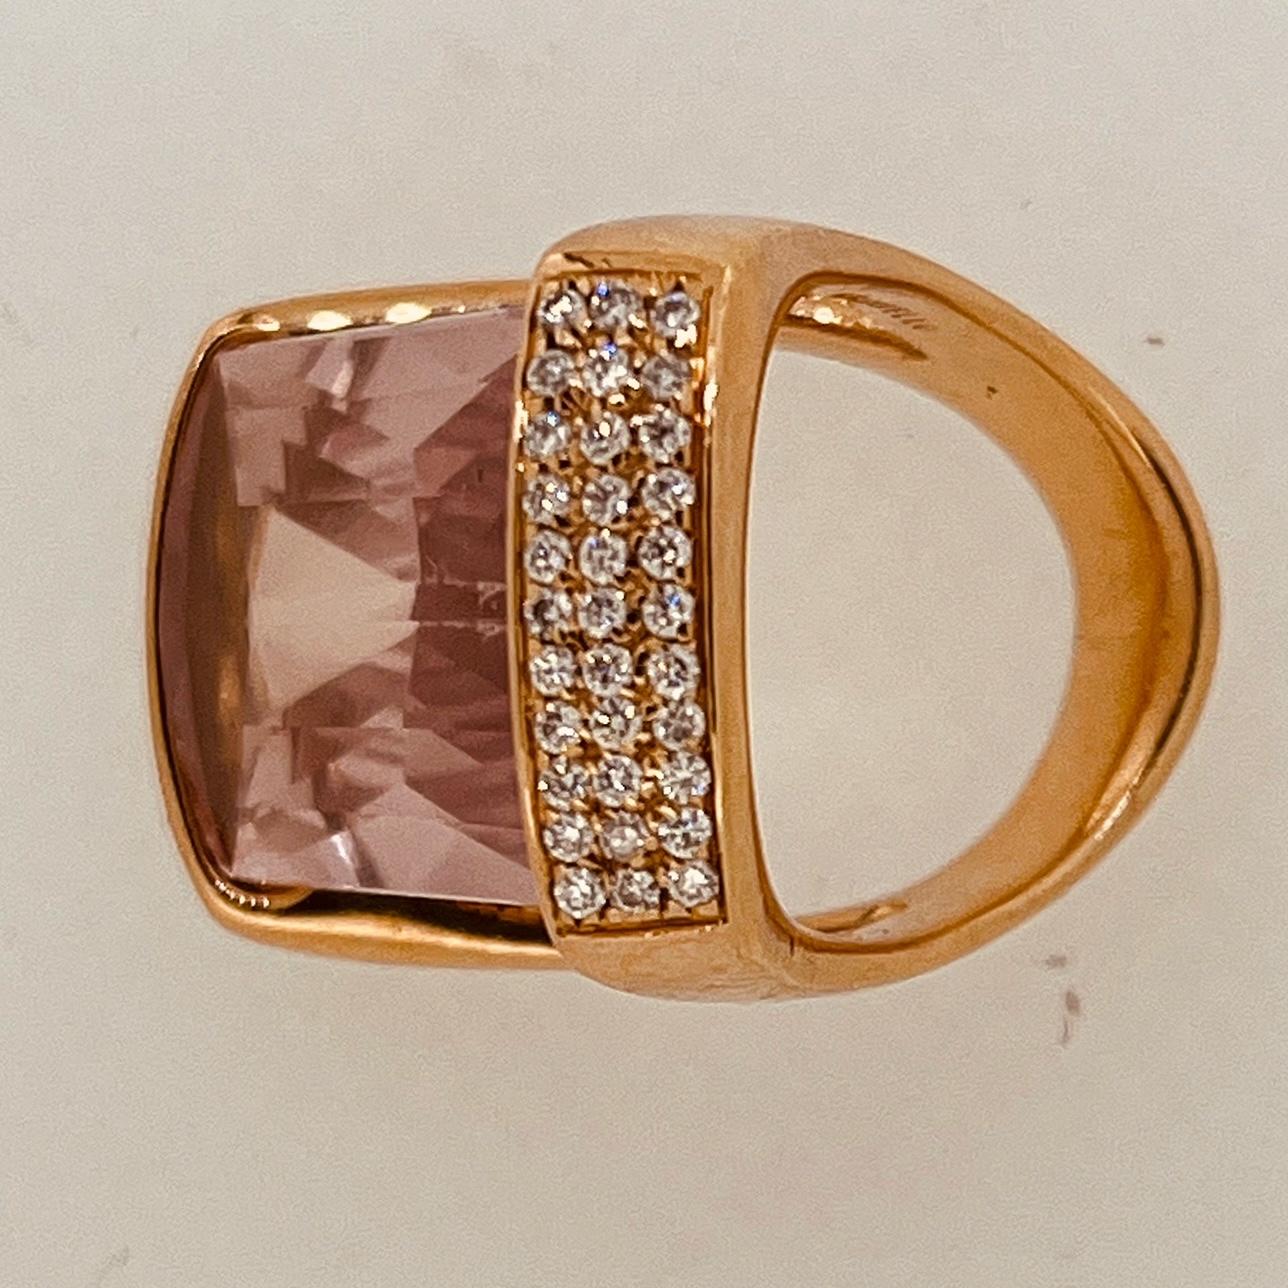 Women's 18ct Gold Ring Centering a Square Cut Morganite Suspended by 0.9ct Pave Diamonds For Sale